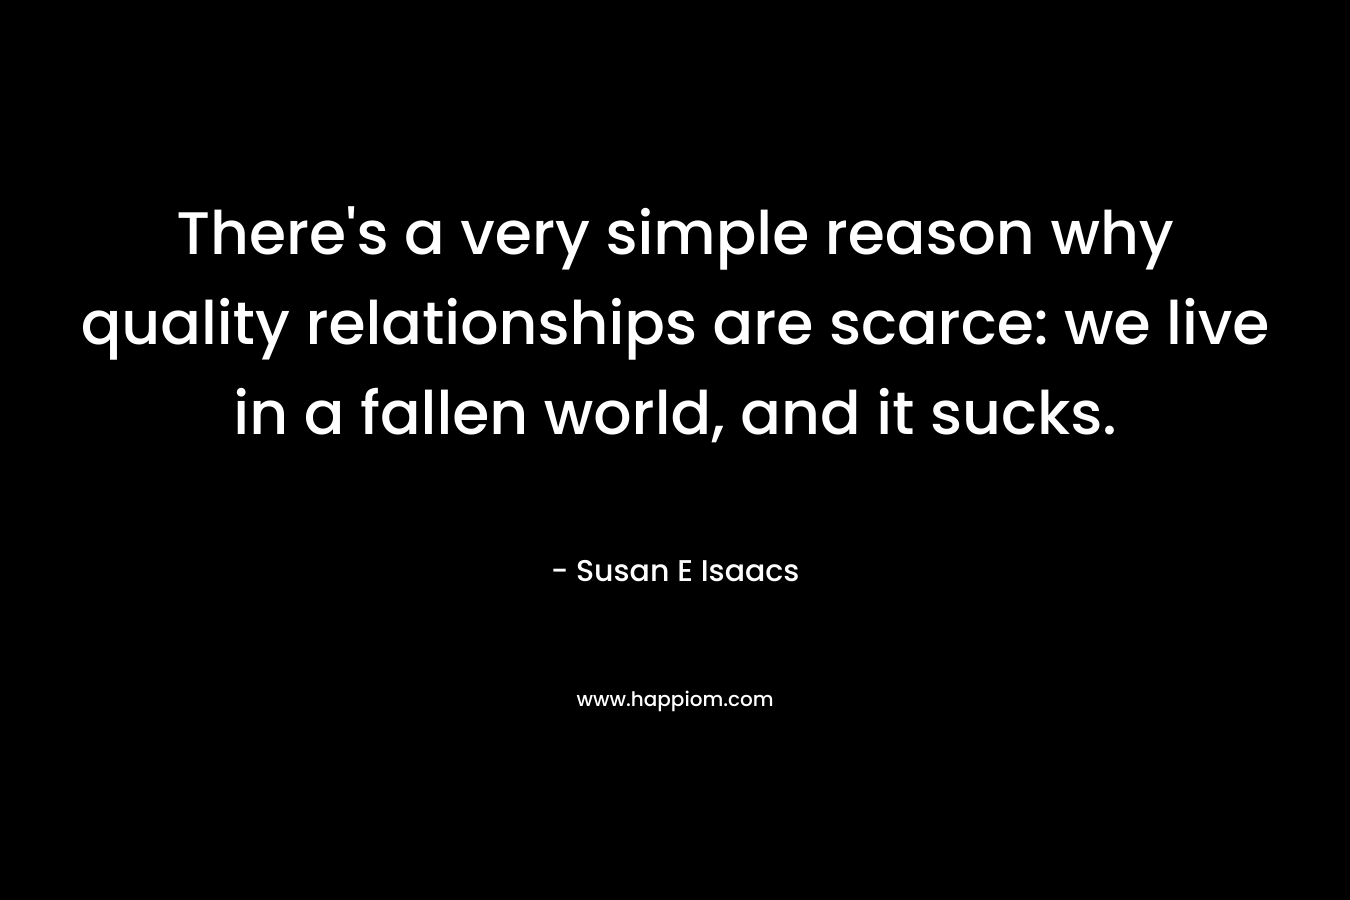 There’s a very simple reason why quality relationships are scarce: we live in a fallen world, and it sucks. – Susan E Isaacs